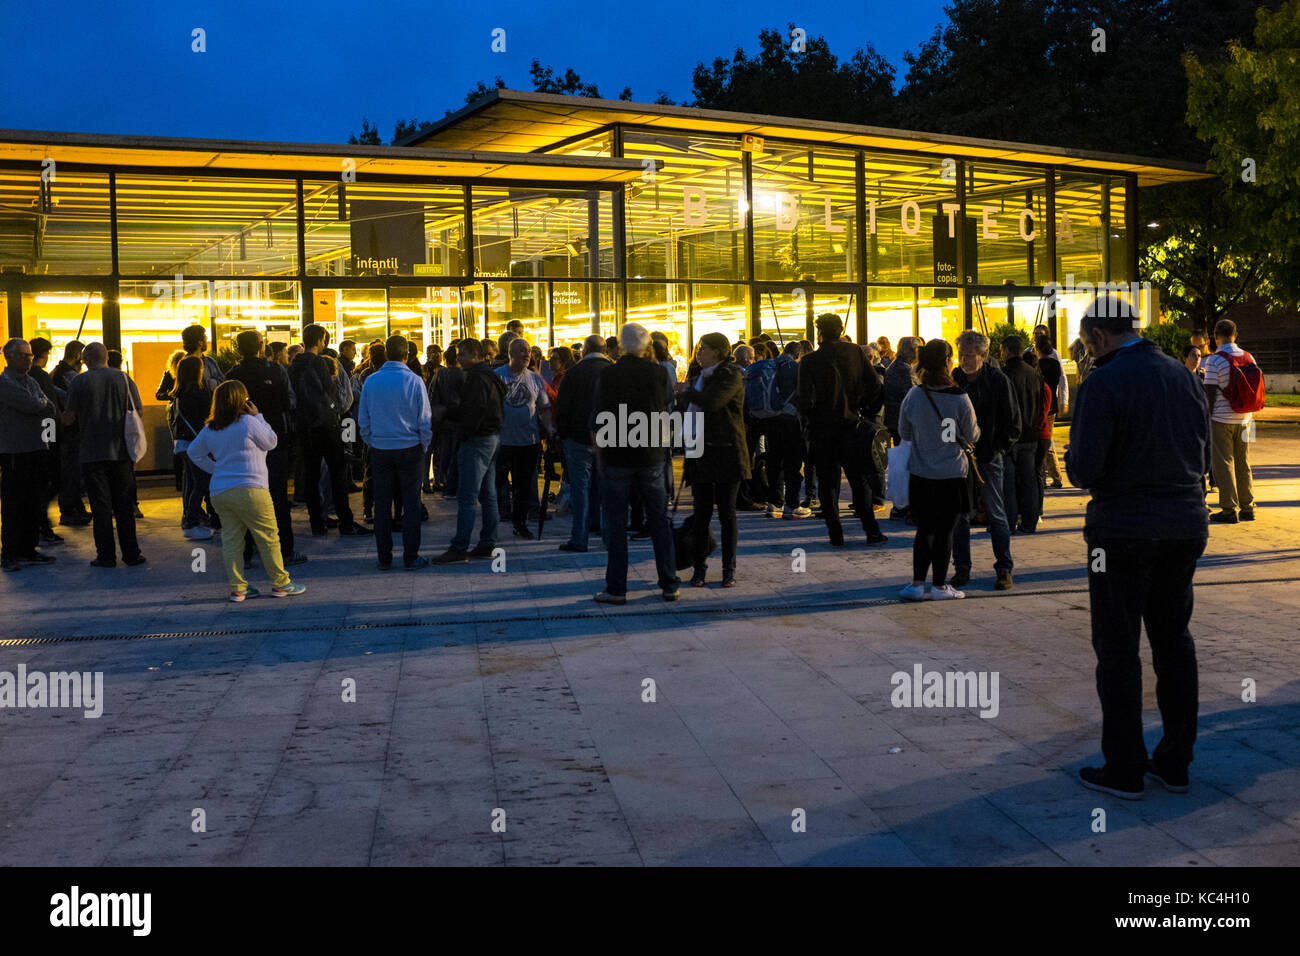 Barcelona, Spain. 1st Oct, 2017. Catalans waiting to vote at Biblioteca Central Gabriel Ferrater, Sant Cugat del Valles, just outside Barcelona, Catalonia, so that they can vote in the Catalan Independence Referendum. People had spend the night guarding the voting stations so that they were not seized by police. Credit: deadlyphoto.com/Alamy Live News Stock Photo